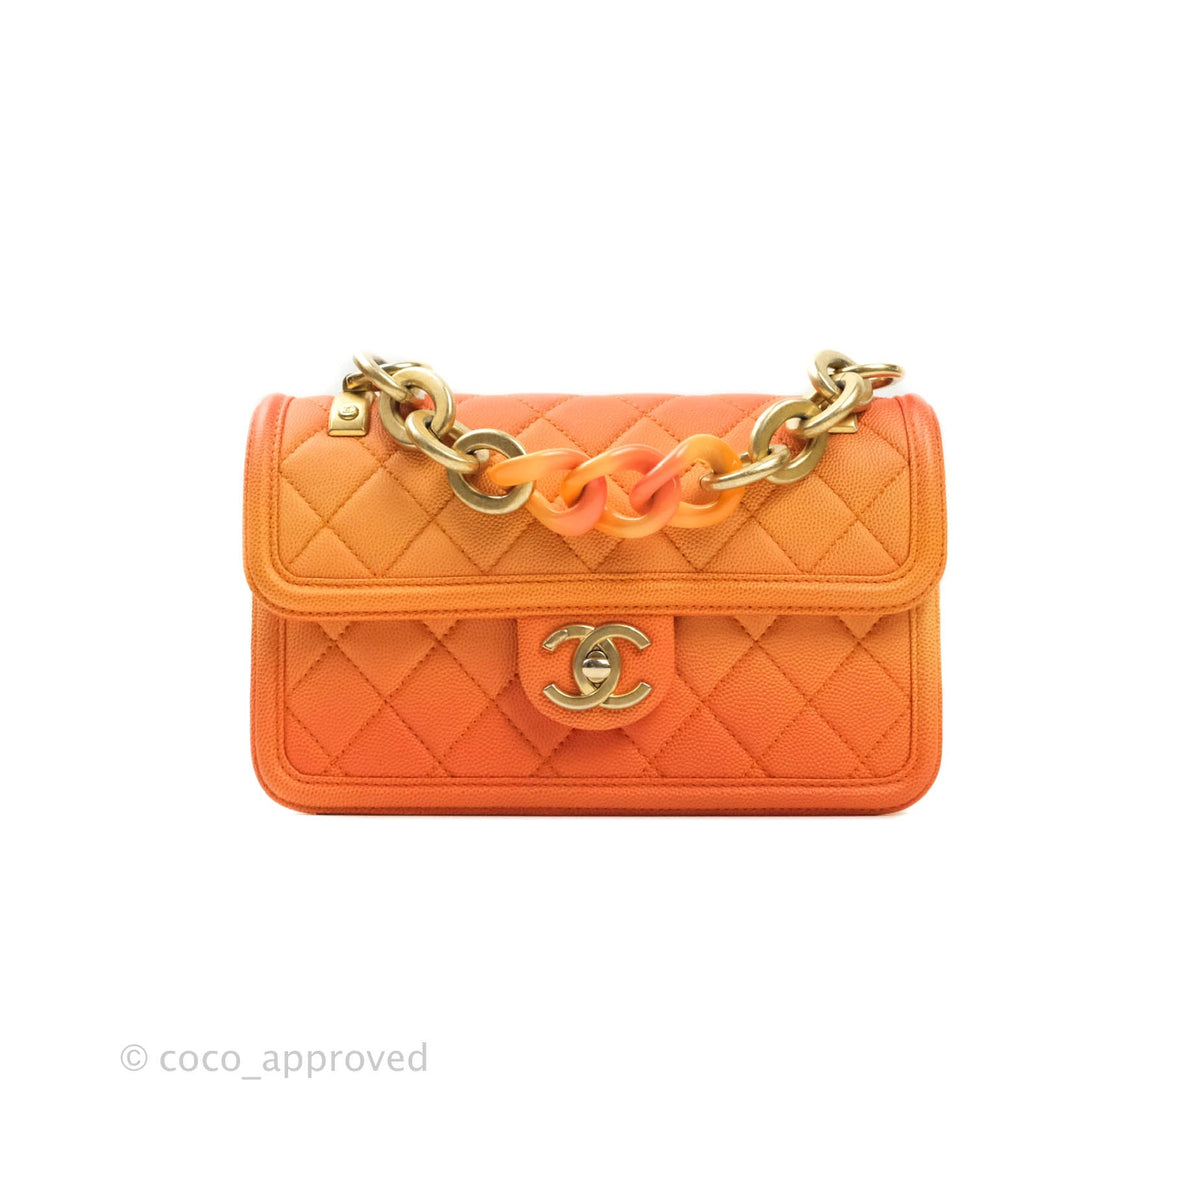 Chanel Sunset by the Sea Bag, Orange Ombre Caviar with Gold Hardware, Mini,  Preowned in Dustbag